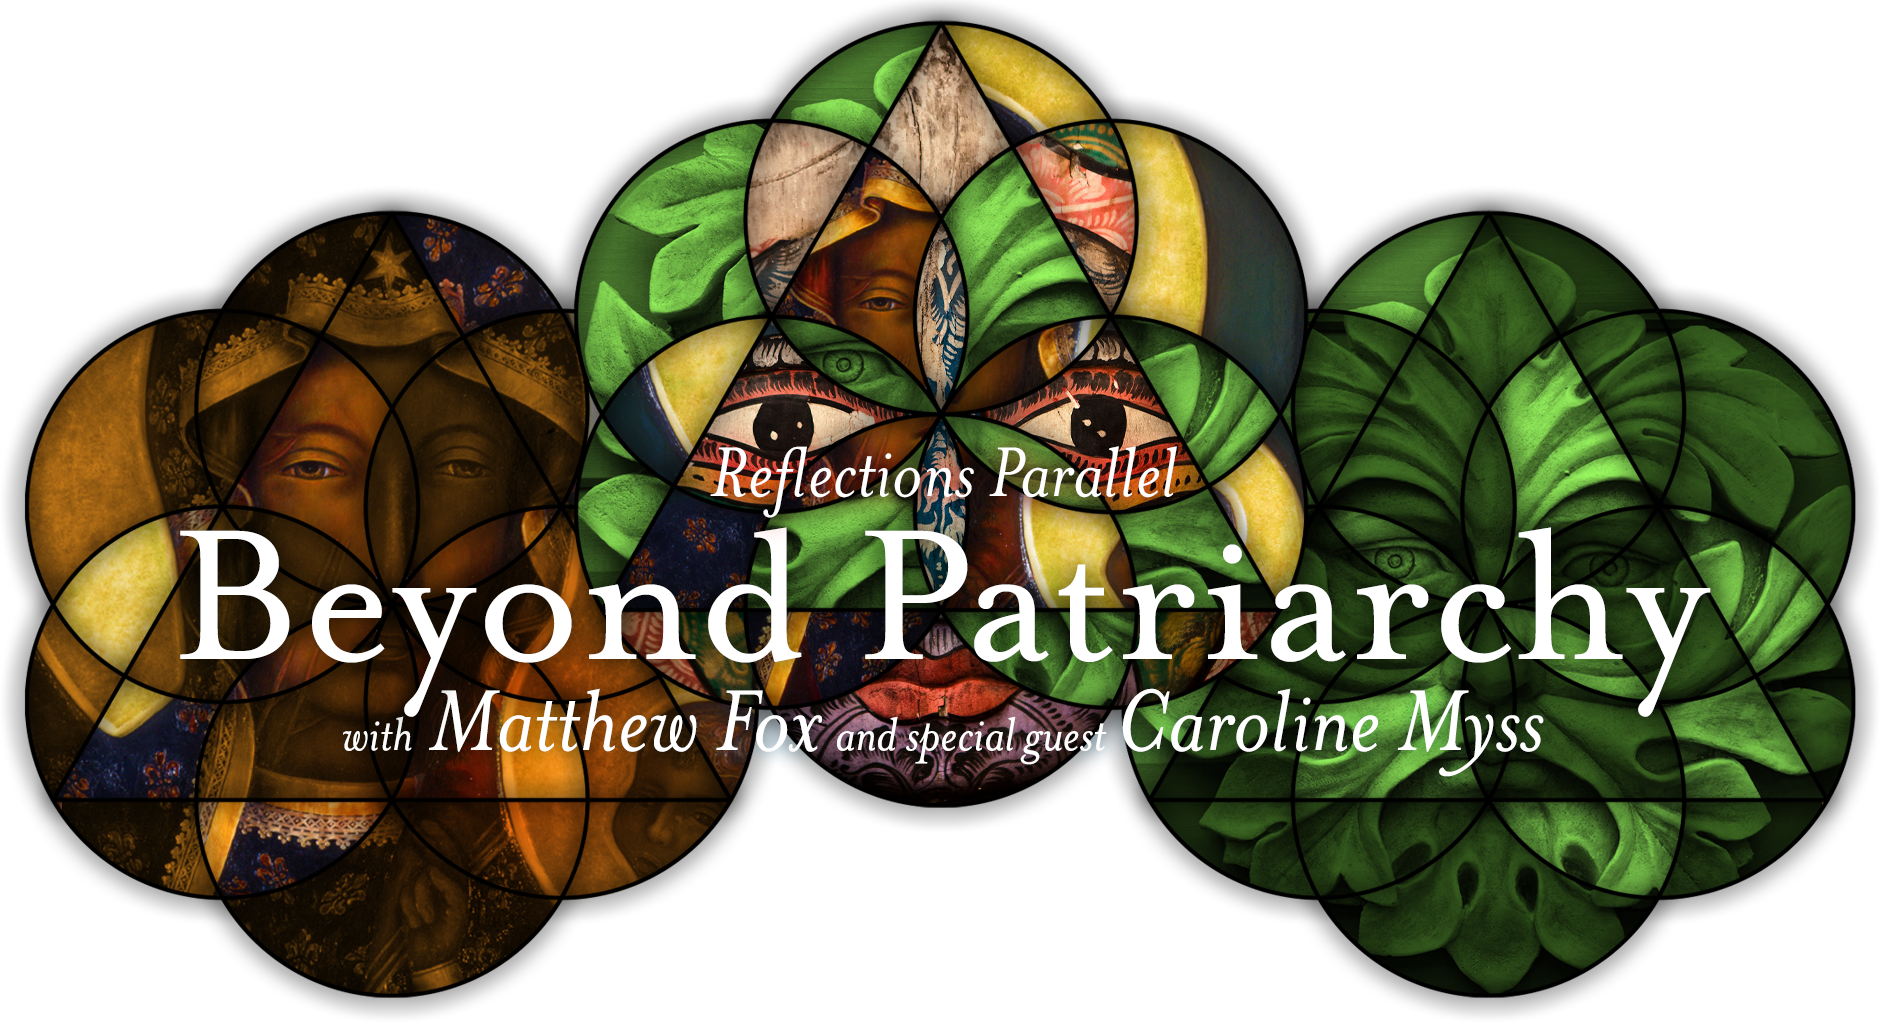 Reflections Parallel: Beyond Patriarchy - with Matthew Fox and special guest Caroline Myss